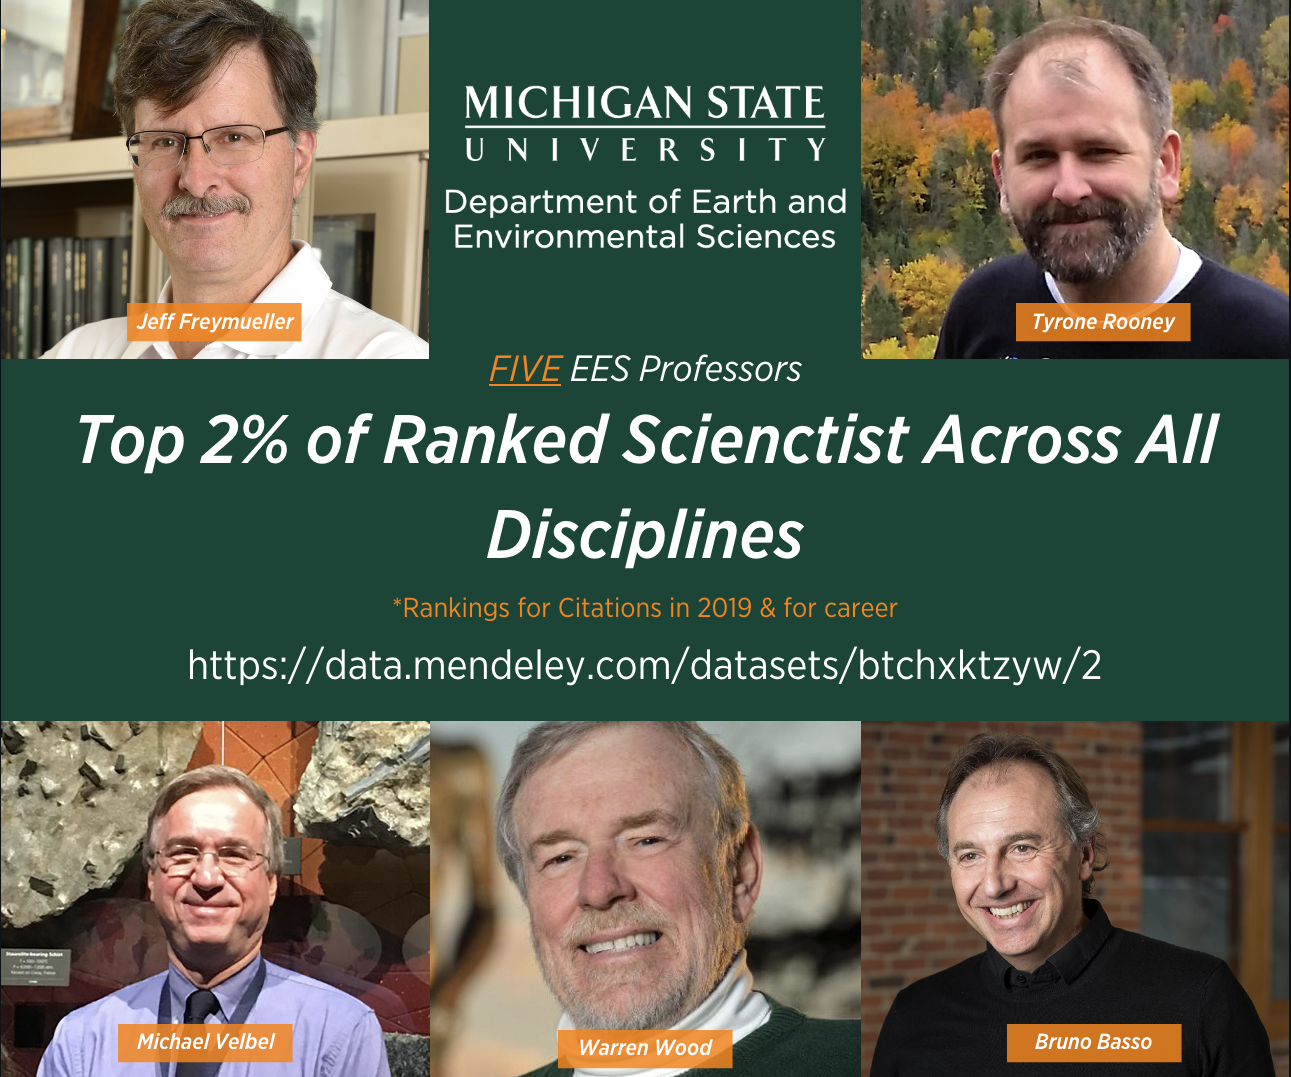 Graphic for 5 EES Professors ranked in top 2%